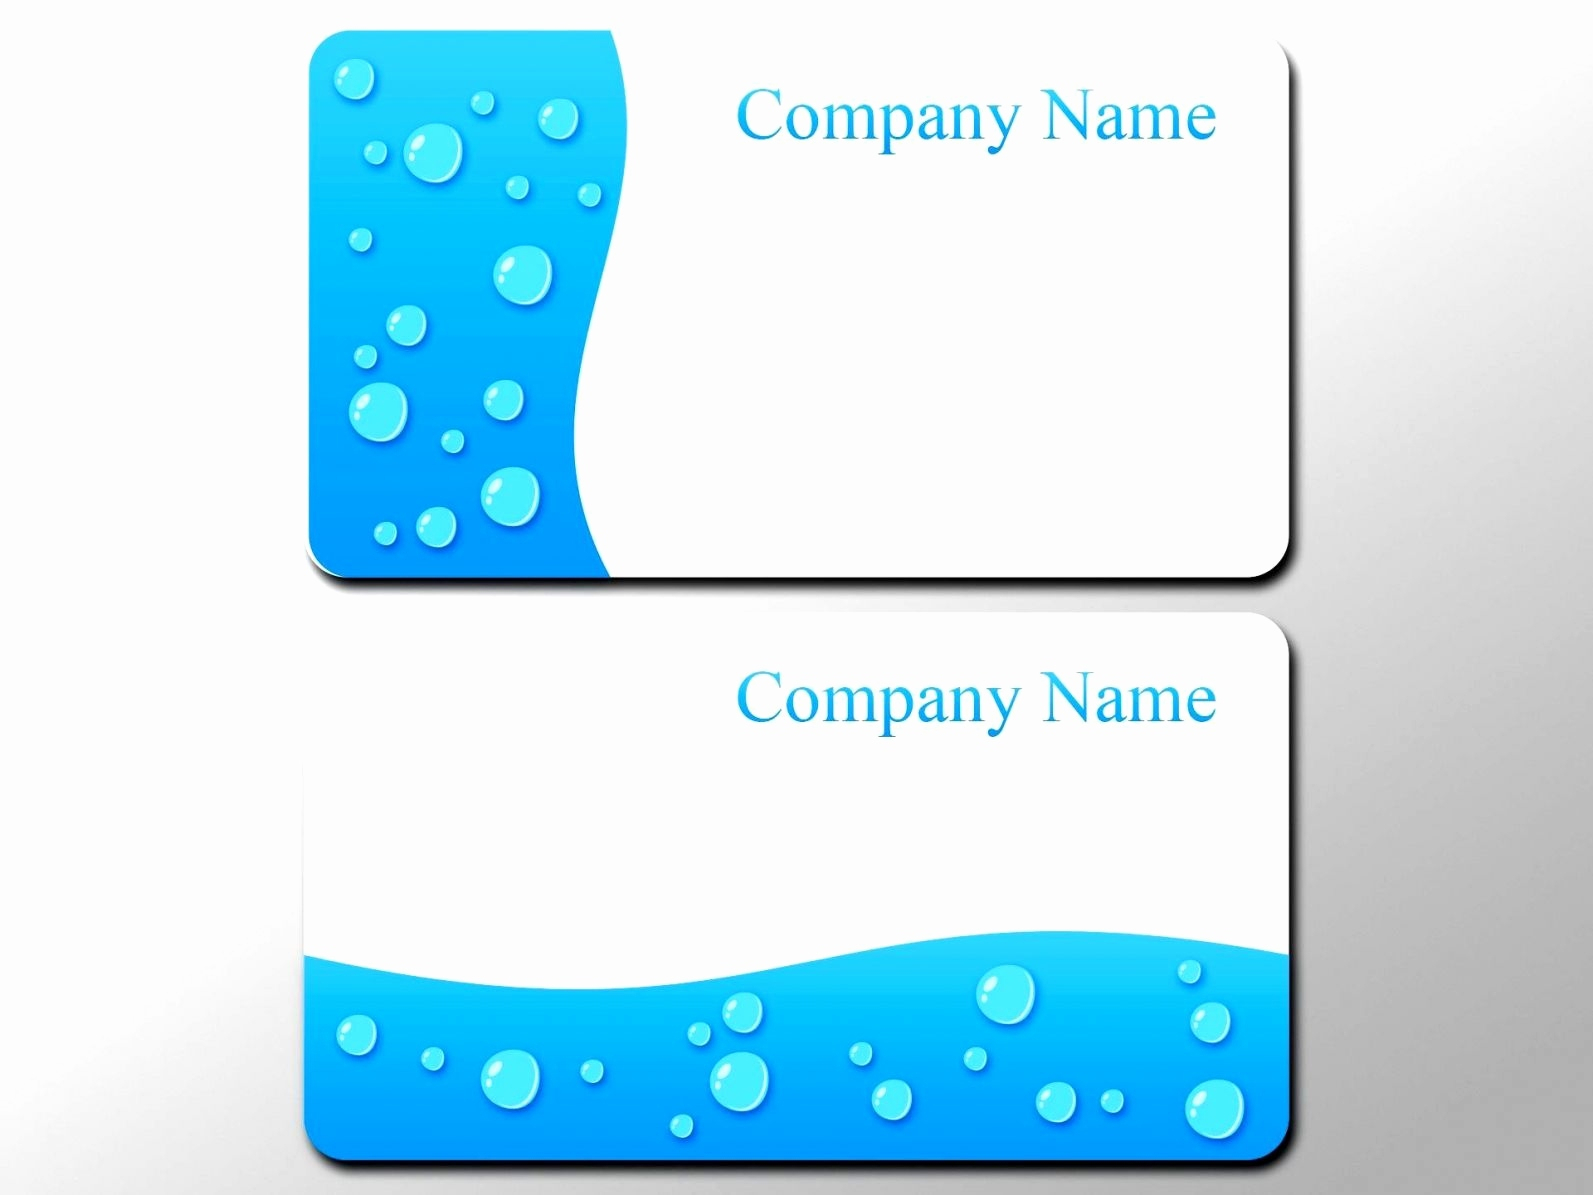 Business Card Format Photoshop Template Cc Beautiful For For Business Card Size Template Photoshop